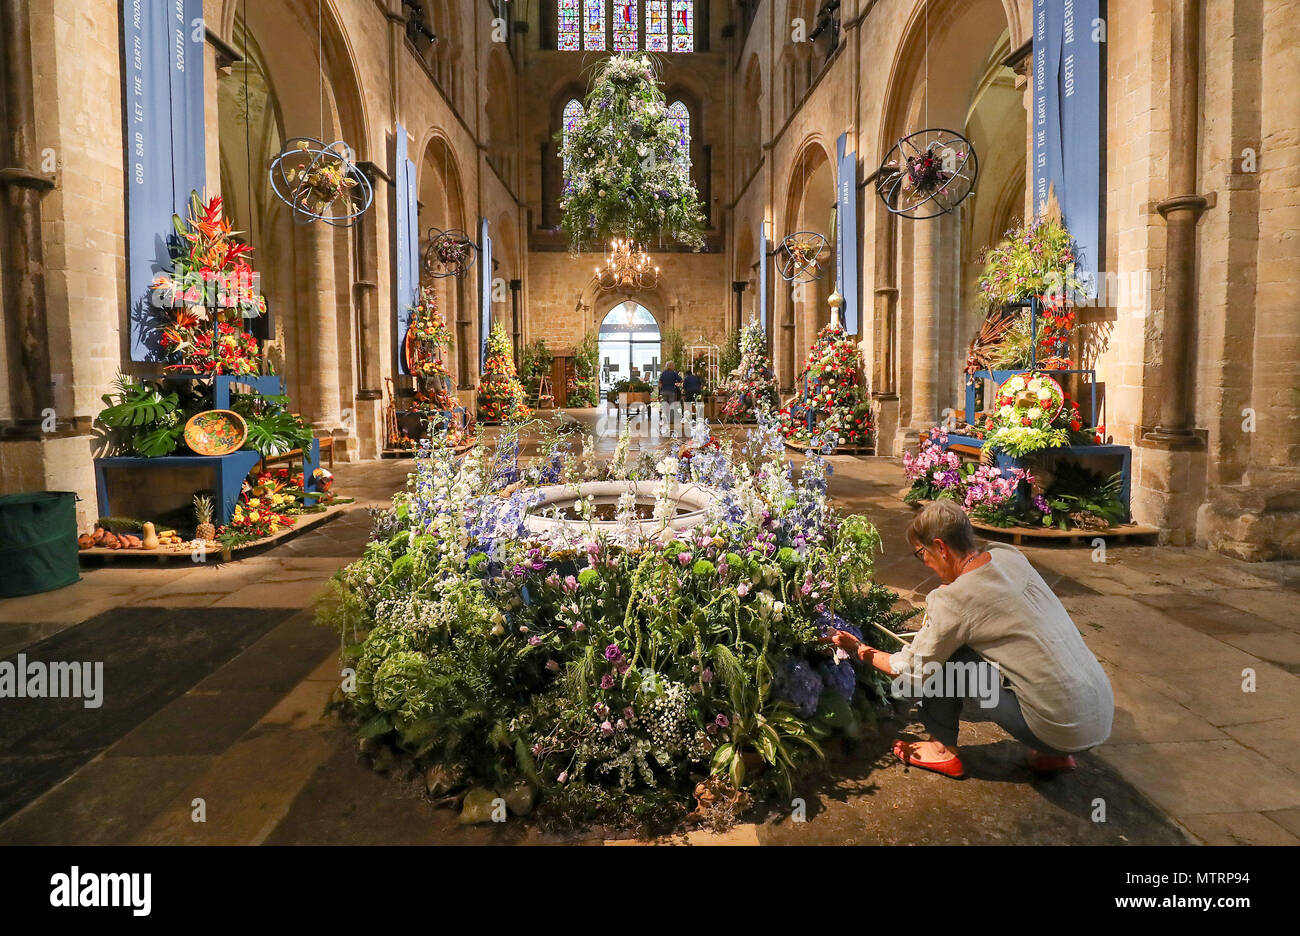 Final preparations are made to displays inside Chichester Cathedral, as it is filled with 80 flower arrangements using over 50,000 flowers, to celebrate its annual Festival of Flowers, which this year has a theme of 'This Earthly Paradise'. Stock Photo